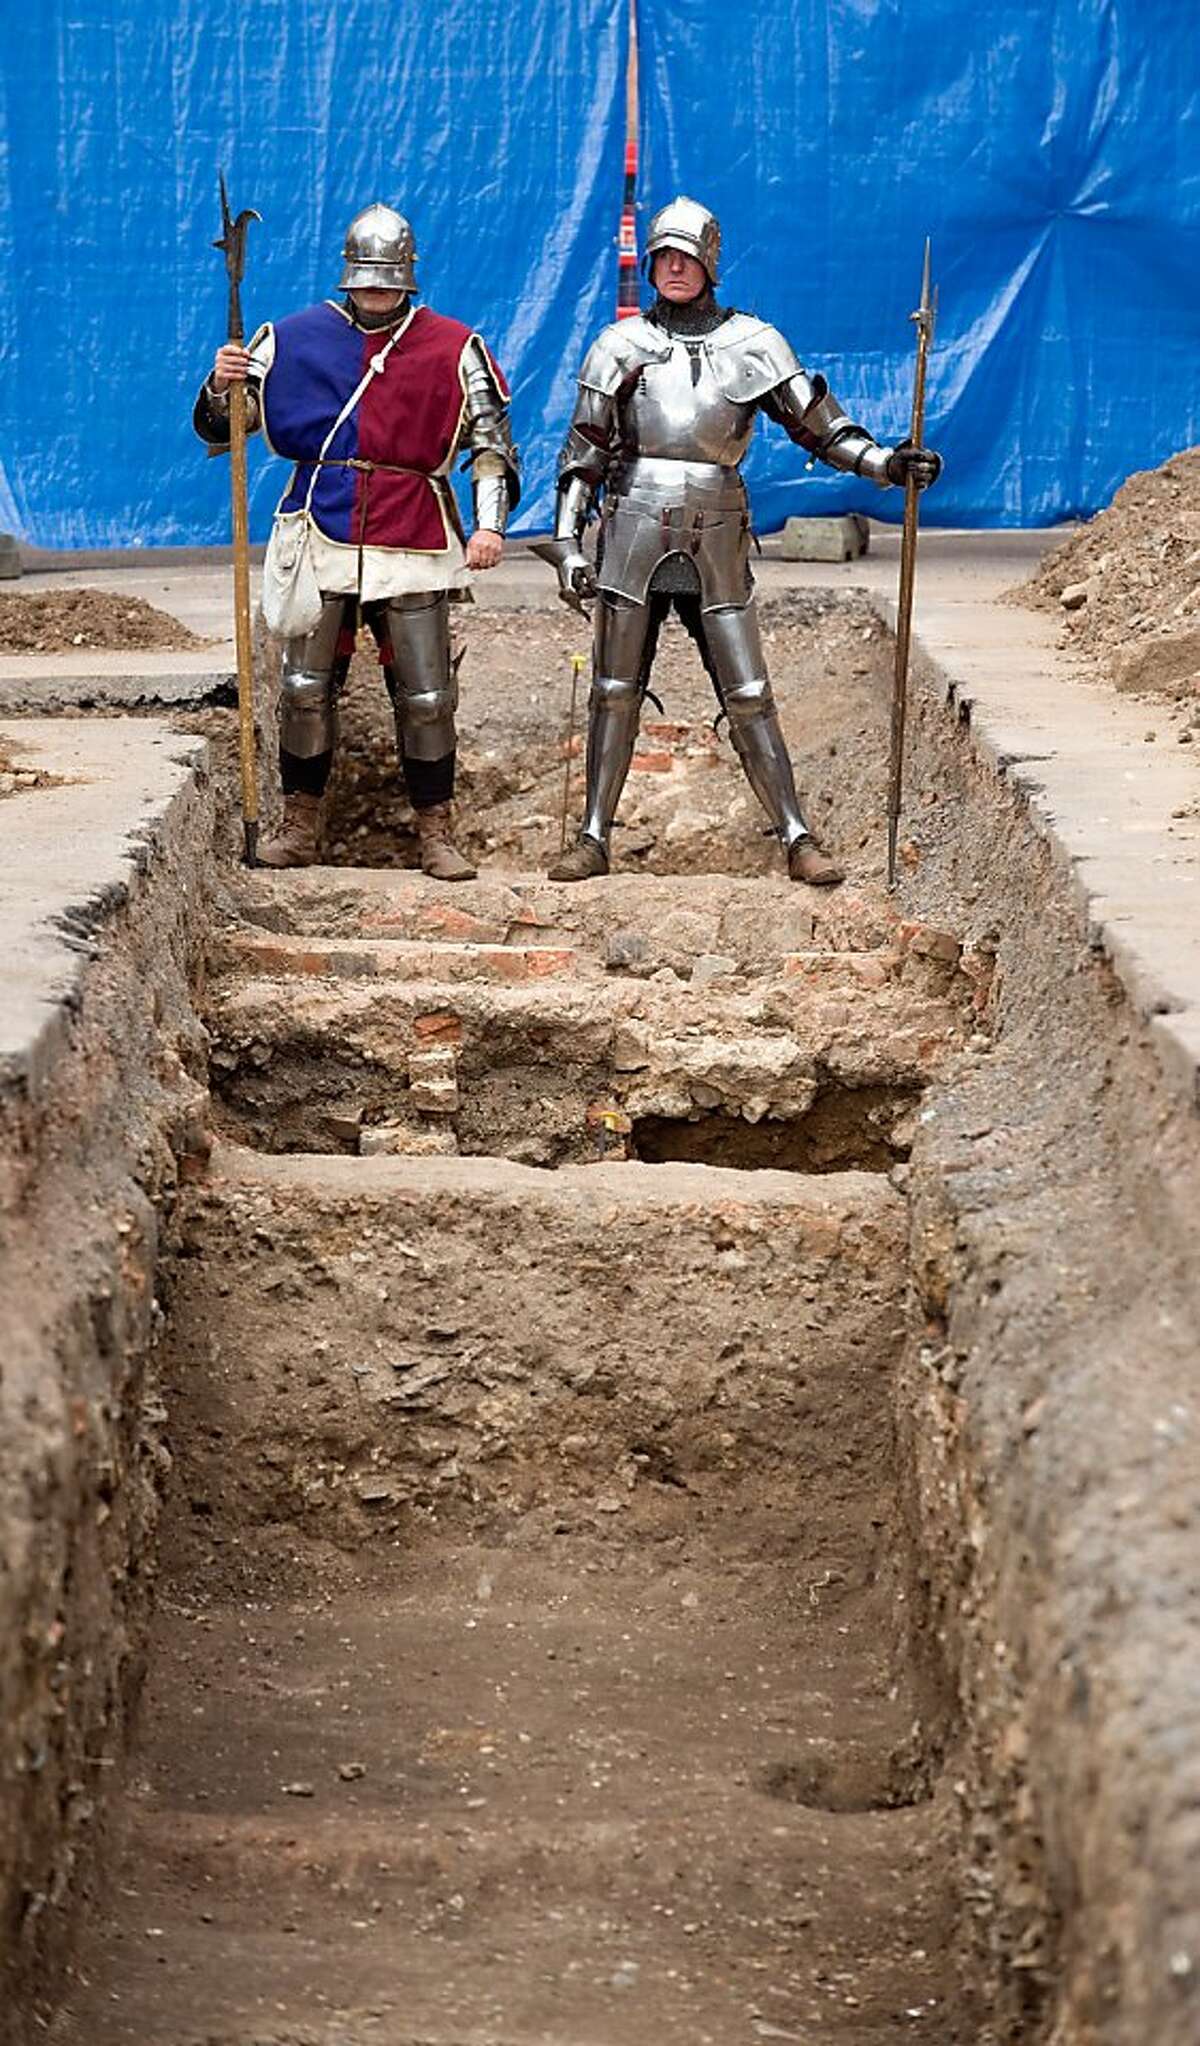 Men dressed as medieval knights pose for pictures in Leicester in central England, on September 12, 2012, at a site where a skeleton that researchers believe could be British medieval king Richard III was found. Researchers from the University of Leicester said they had found a male skeleton with similarities to historical descriptions of Richard, who ruled England between 1483 and his death in battle in 1485. The remains, which are well preserved, are undergoing DNA analysis. "What we have uncovered is truly remarkable," said Richard Taylor, the university's director of corporate affairs. AFP PHOTO / Gavin FoggGavin Fogg/AFP/GettyImages